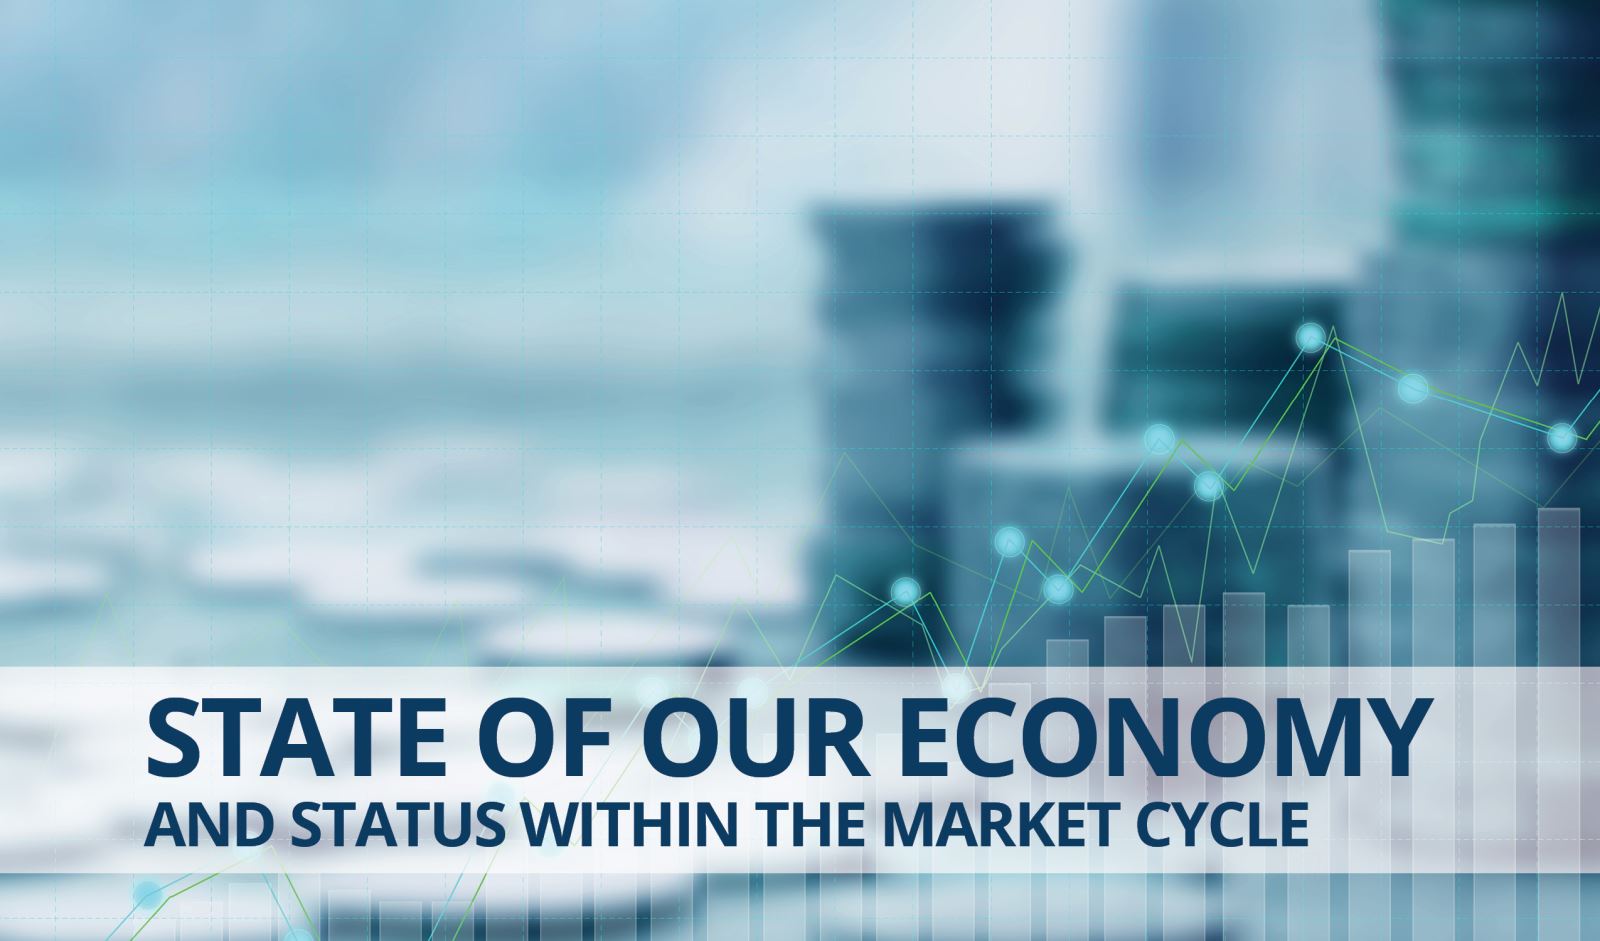 State of our Economy and Status within the Market Cycle